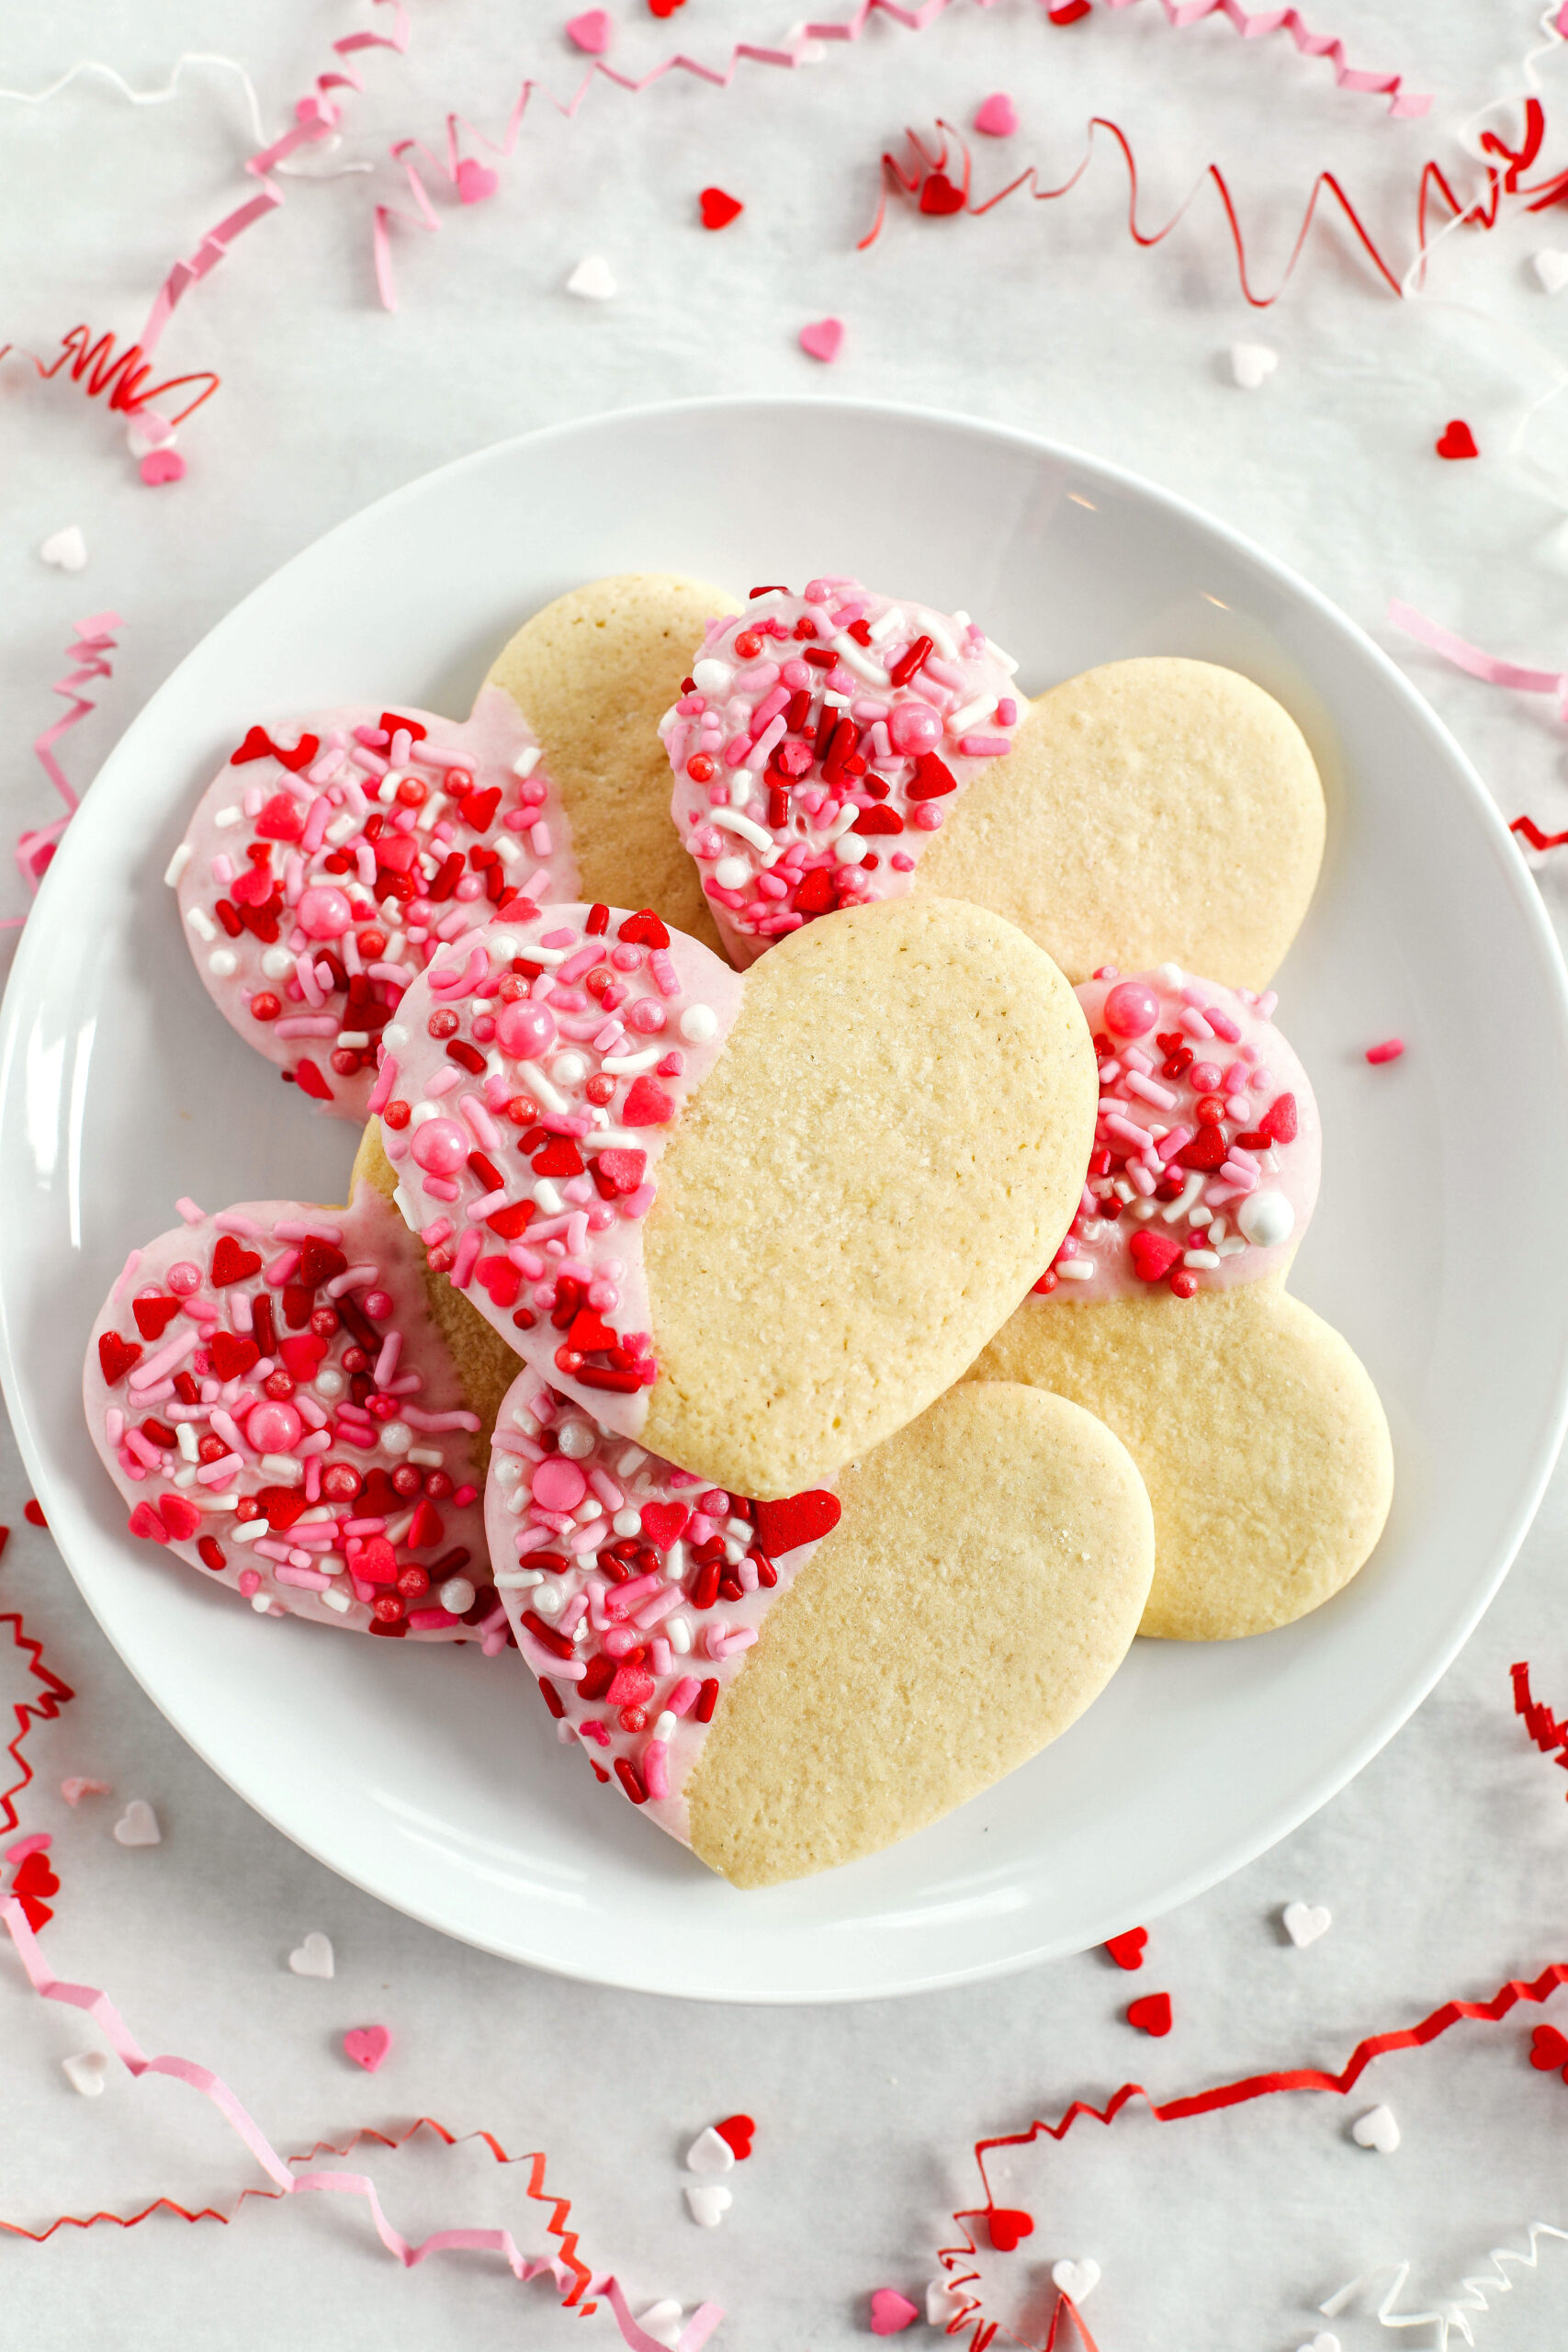 These Valentine's Day Grain-Free Sugar Cookies are soft on the inside and deliciously chewy on the outside!  Cut them into fun shapes and have fun decorating them for Valentine's Day!